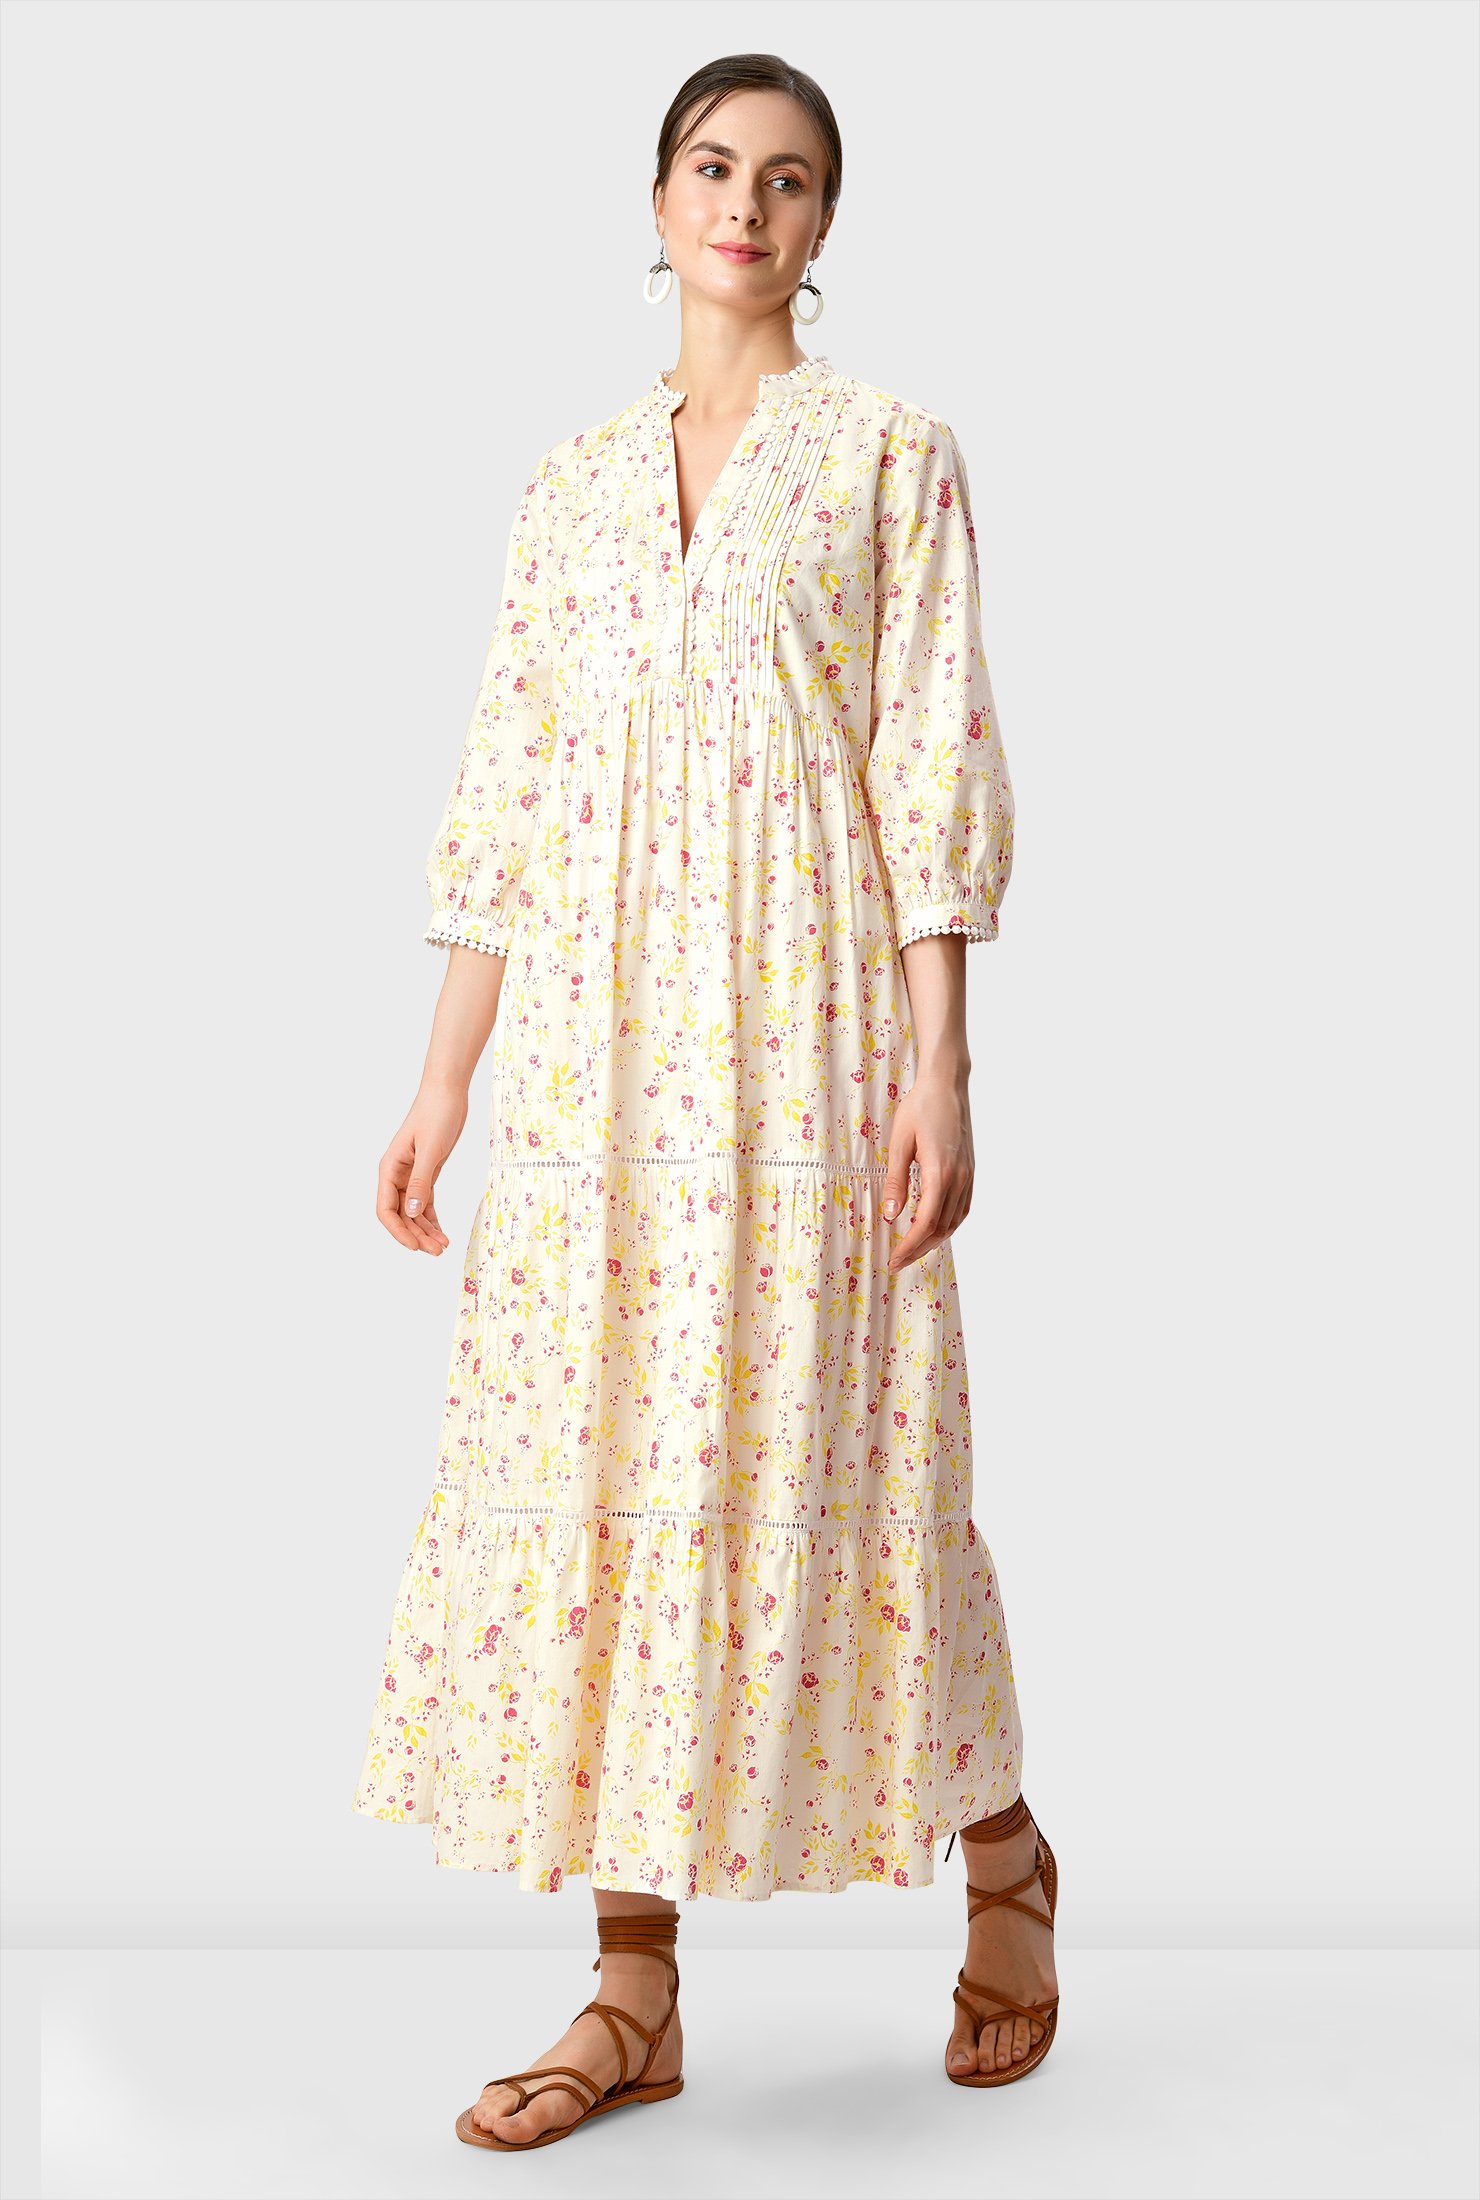 Floral print cotton poplin in a relaxed silhouette has an added twist with an optional self-sash-tie belt and a ruched pleat tier full skirt.